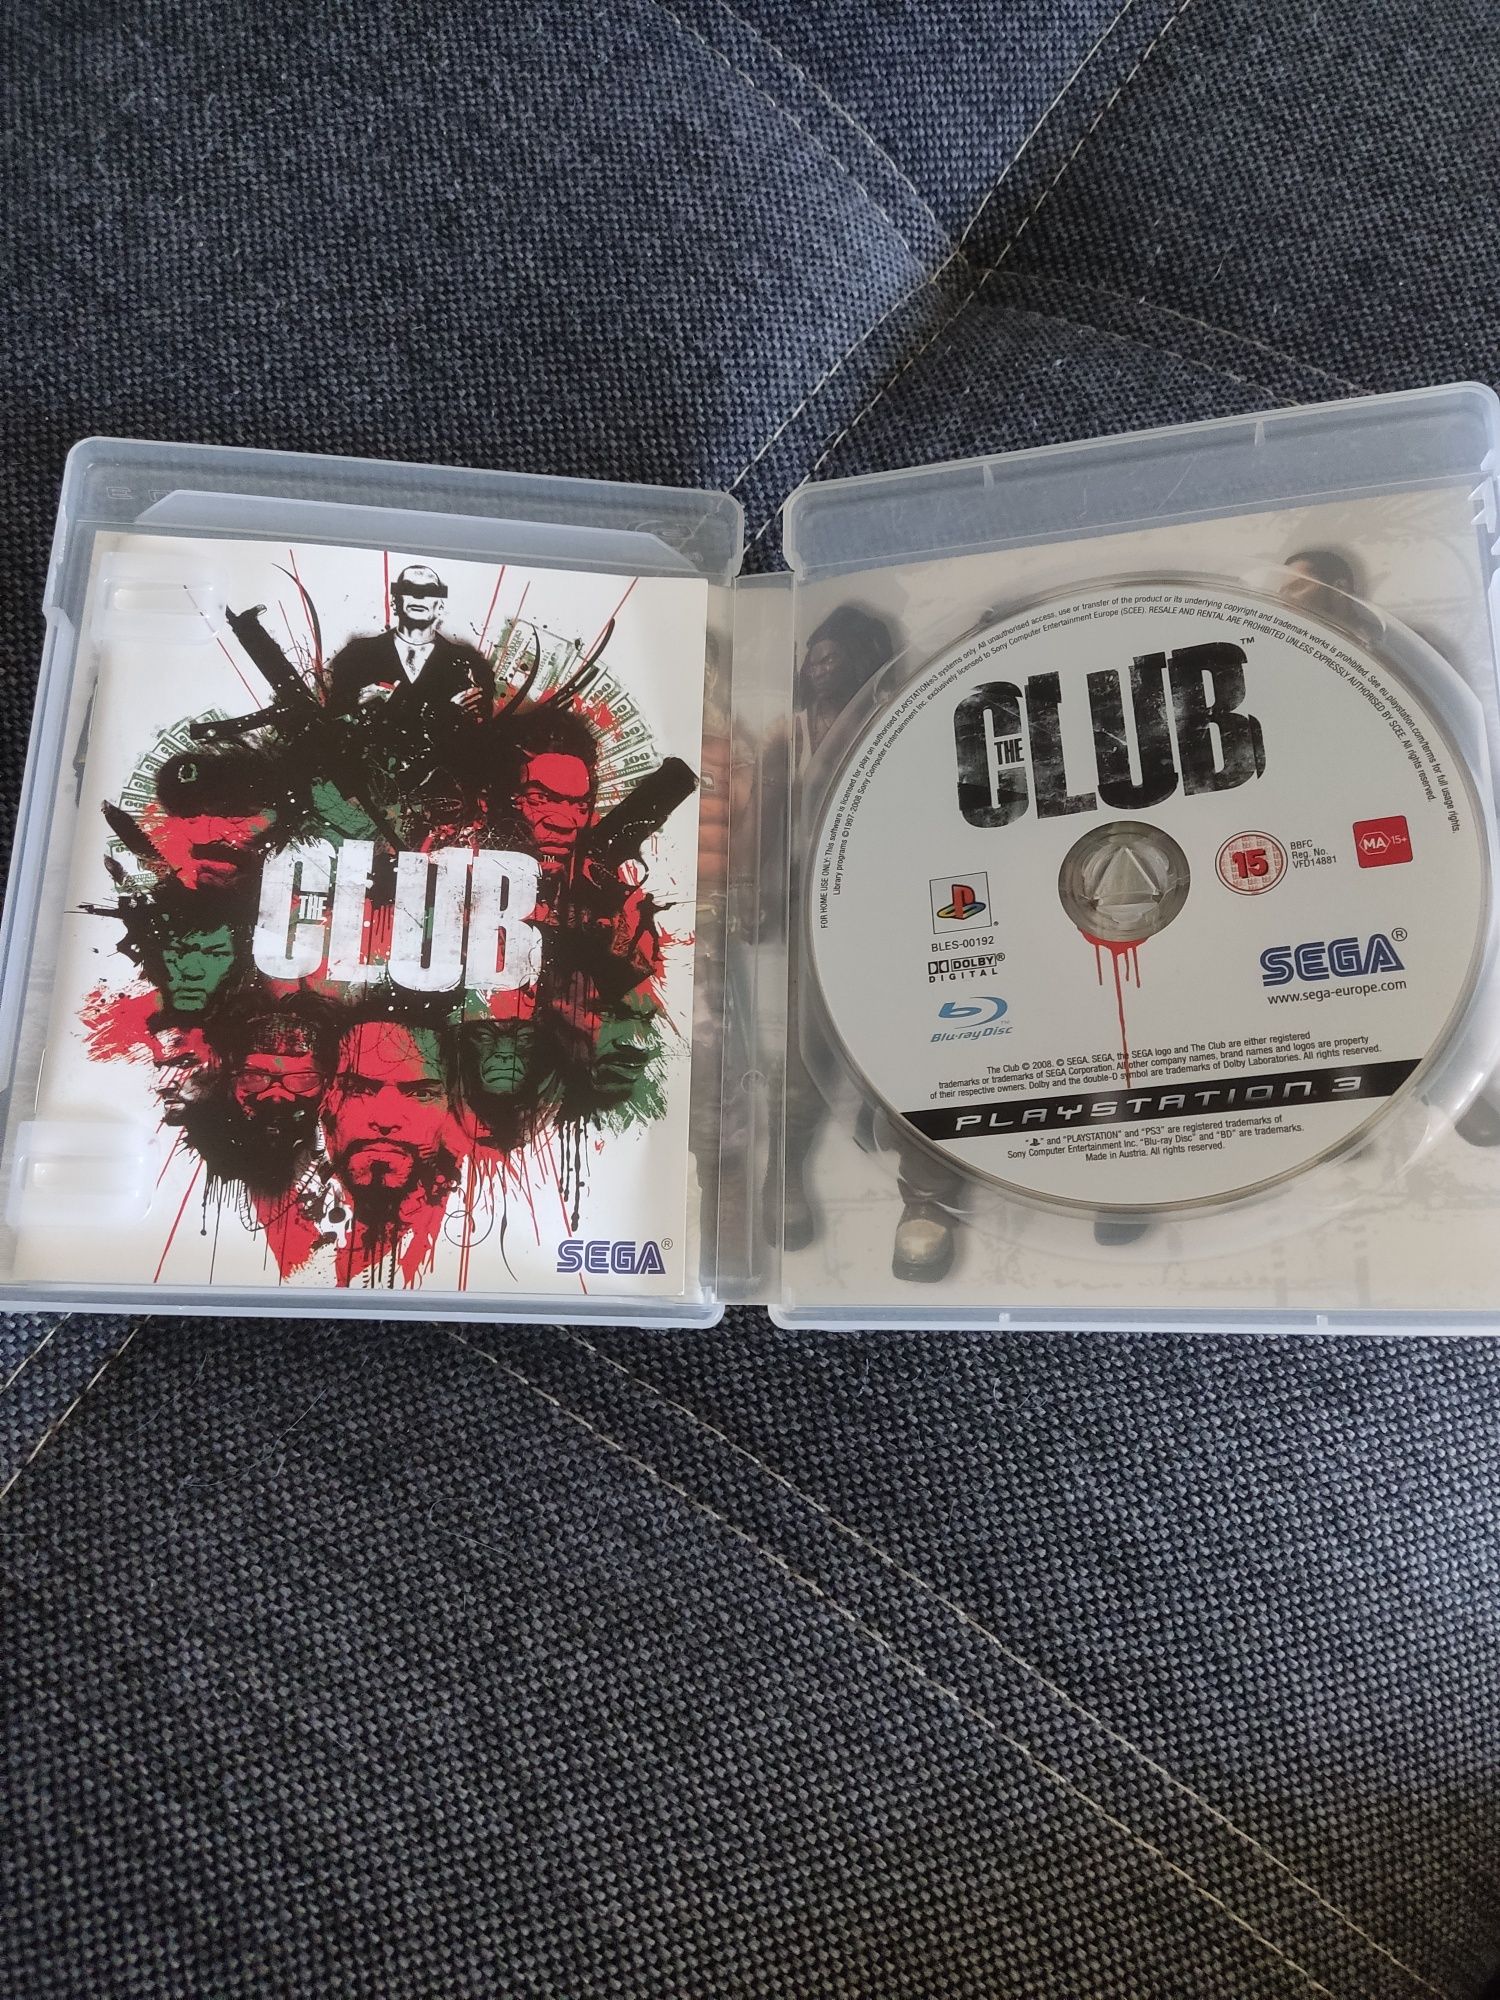 The club ps3 PlayStation 3